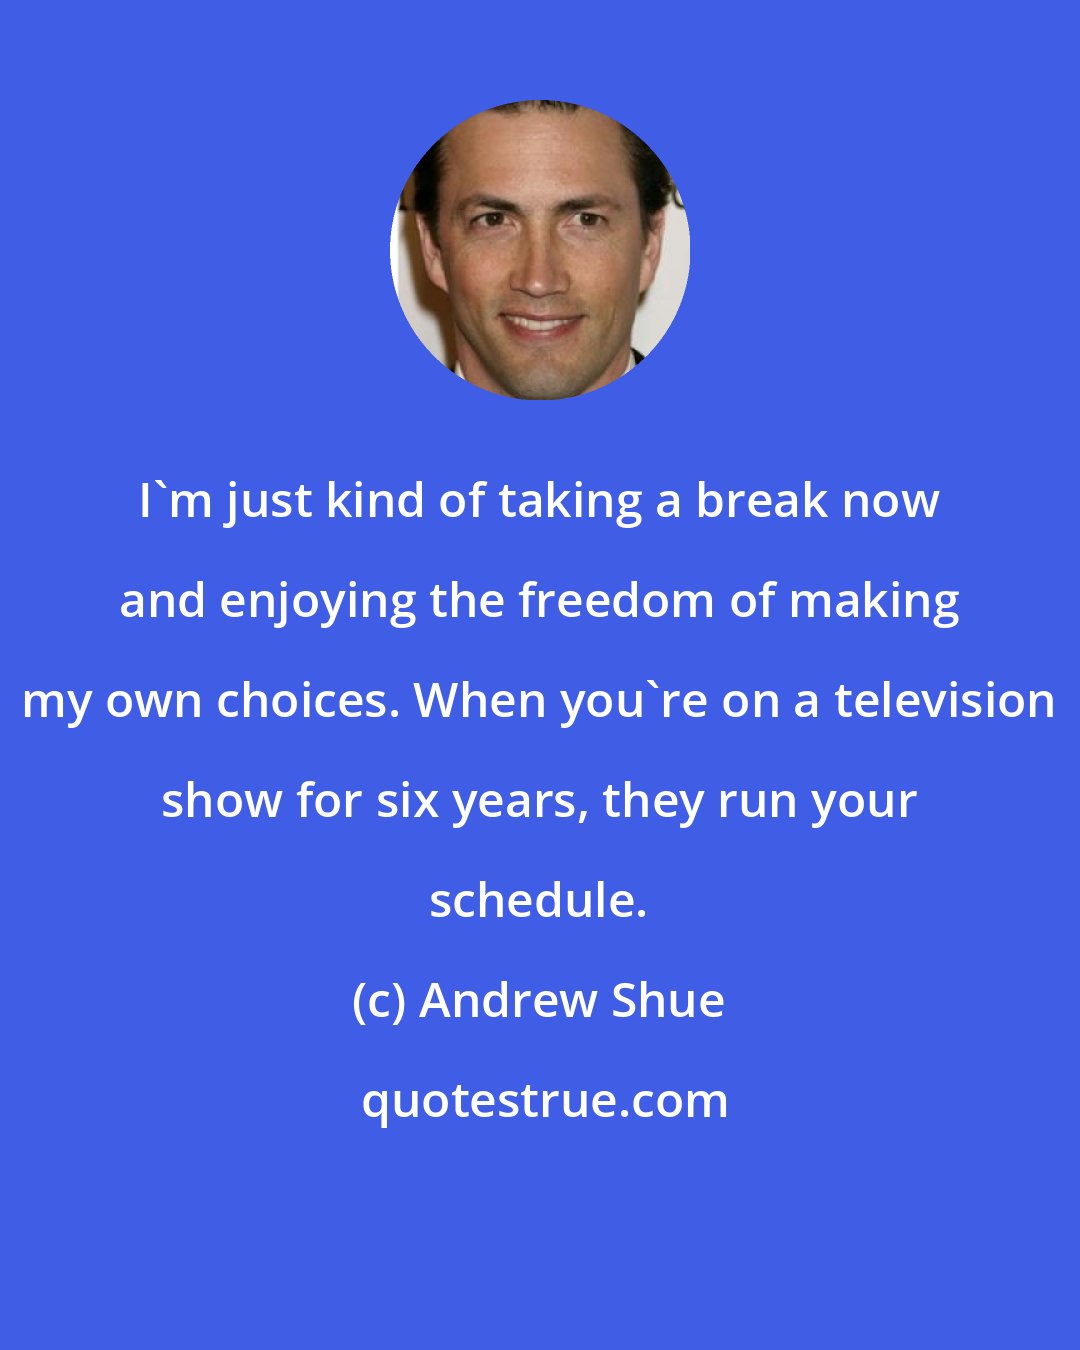 Andrew Shue: I'm just kind of taking a break now and enjoying the freedom of making my own choices. When you're on a television show for six years, they run your schedule.